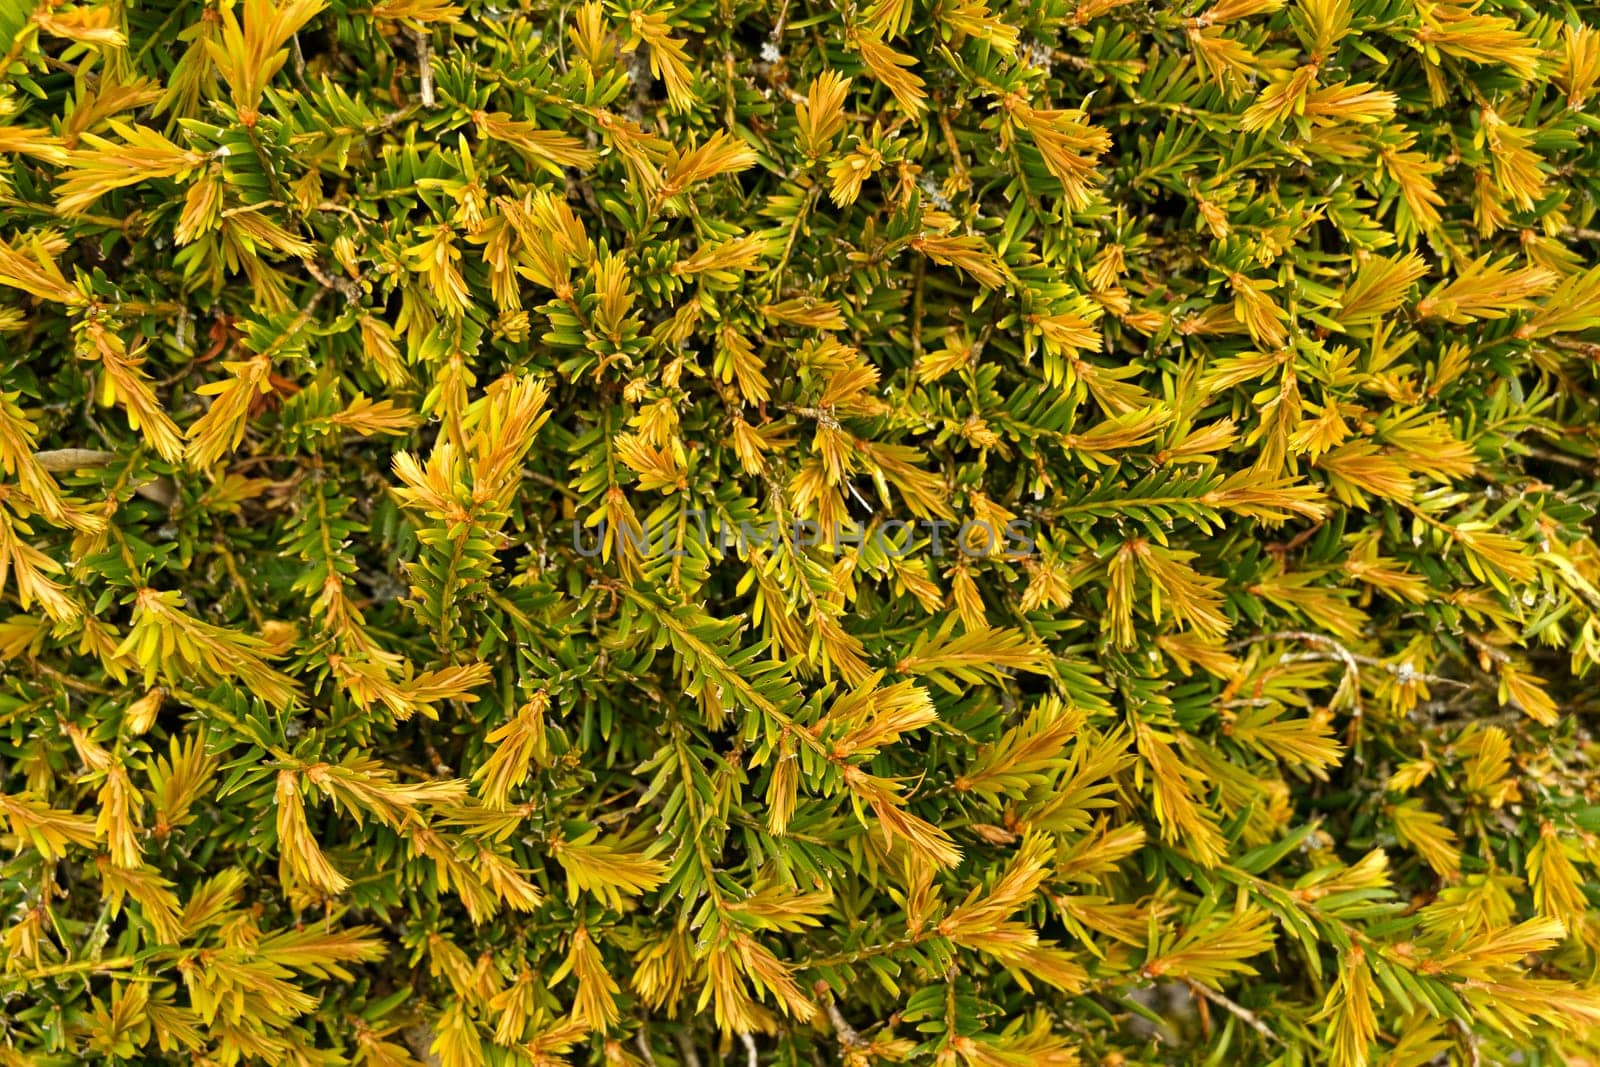 A detailed view of a yellow bush with textured leaves against a green background.